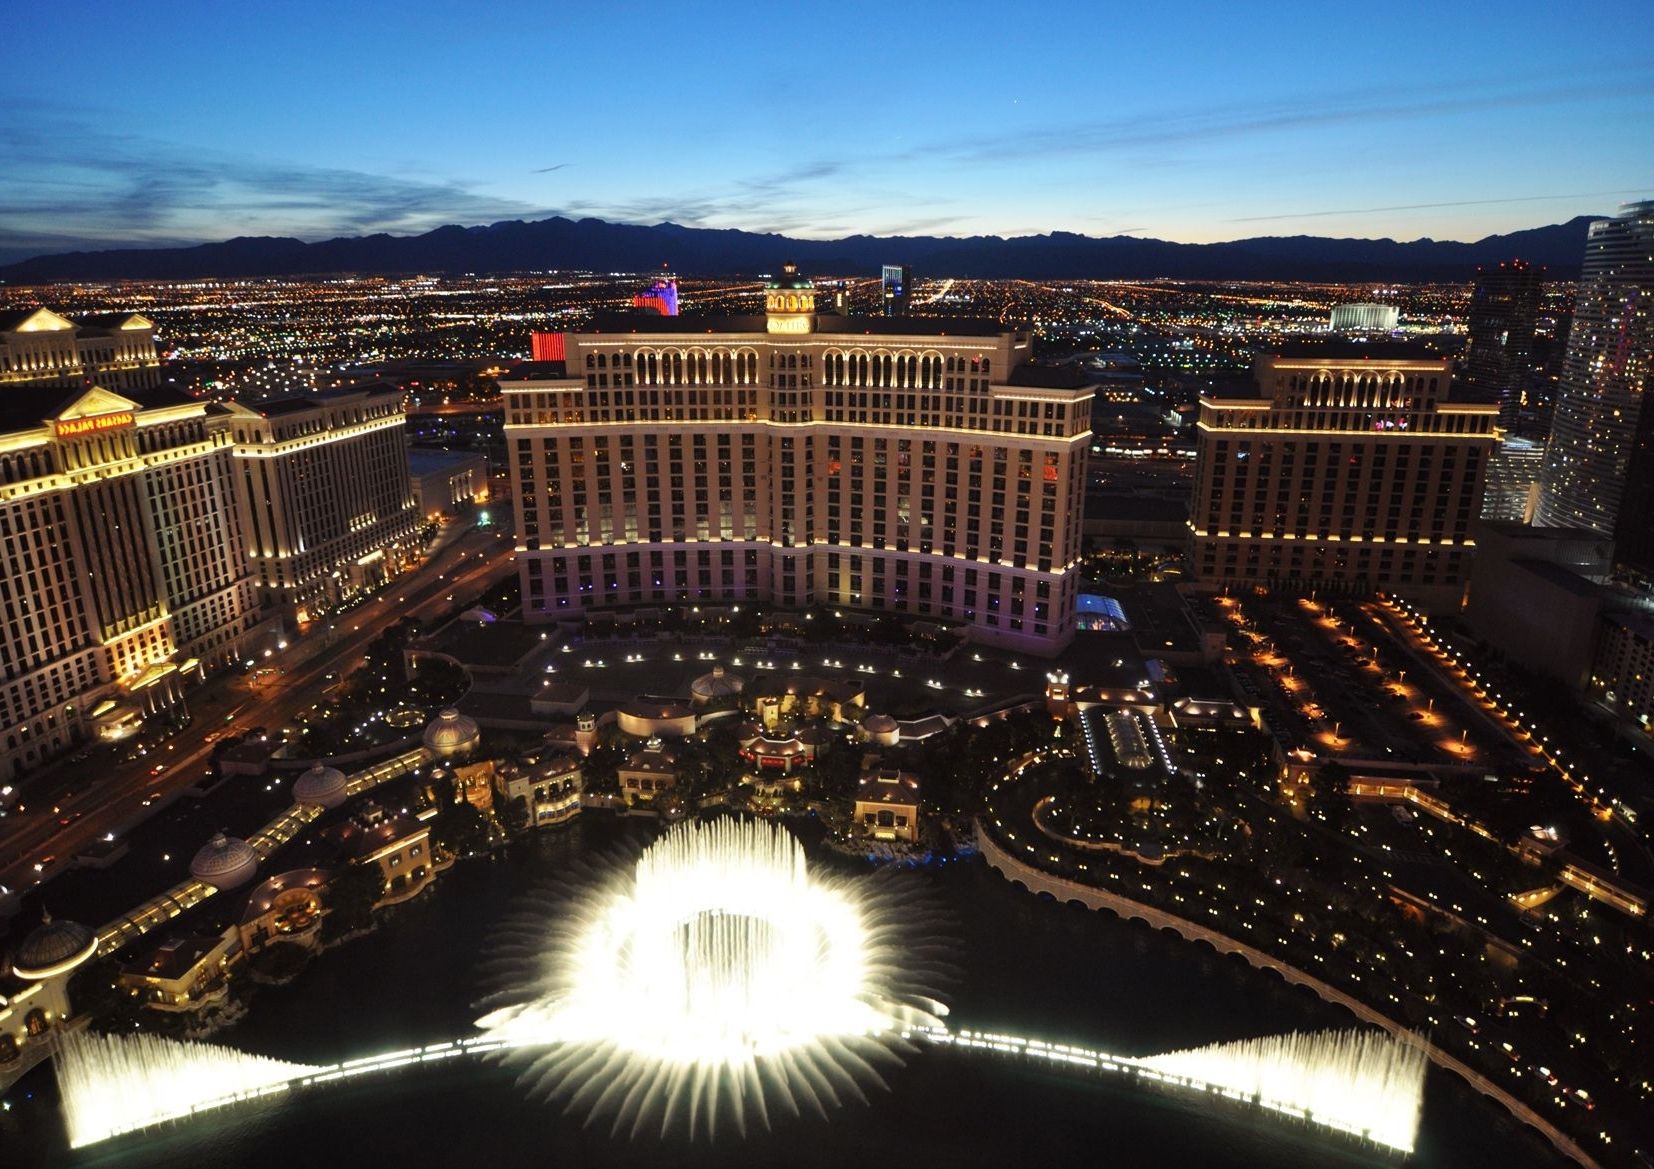 Las Vegas Canvas Wall Art Within Well Known The Bellagio Fountains Las Vegas Nevada (View 10 of 15)